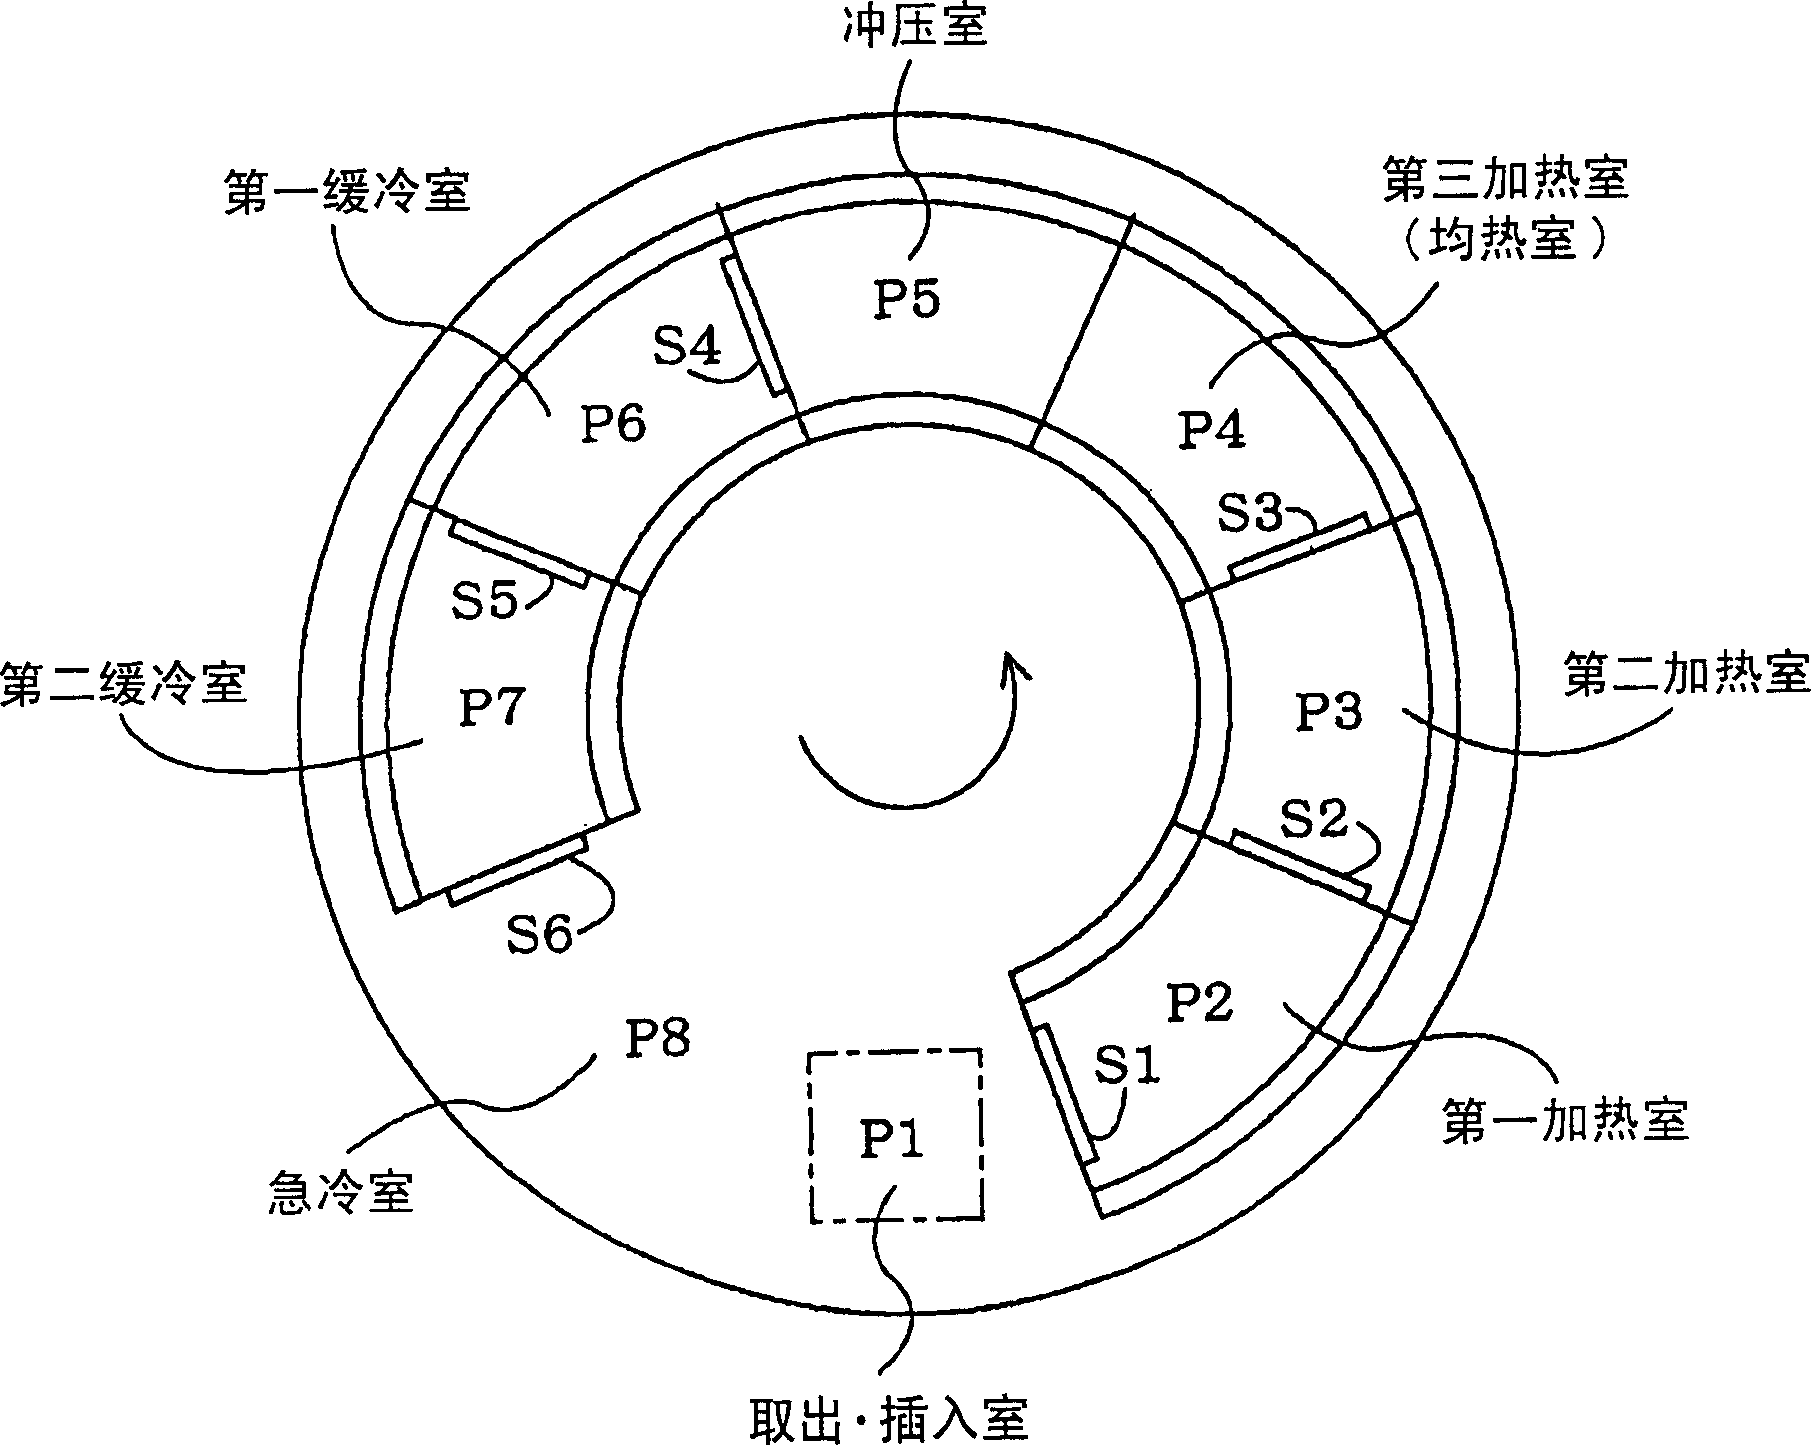 Press mold and method of manufacturing optical element